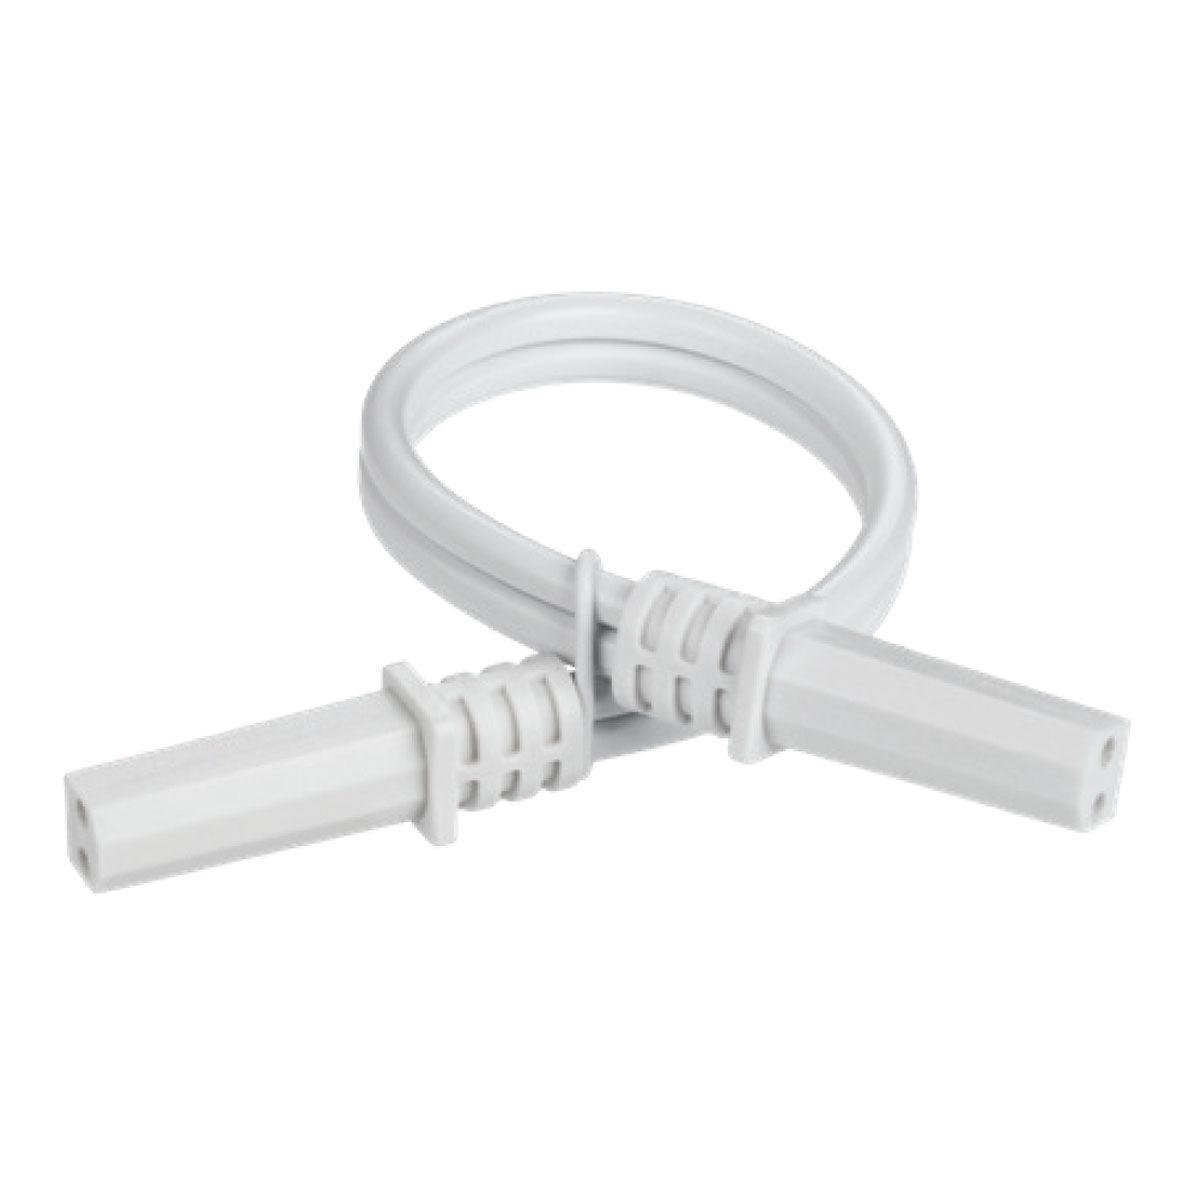 6in. Jumper with straight plugs for Microlink Bar light